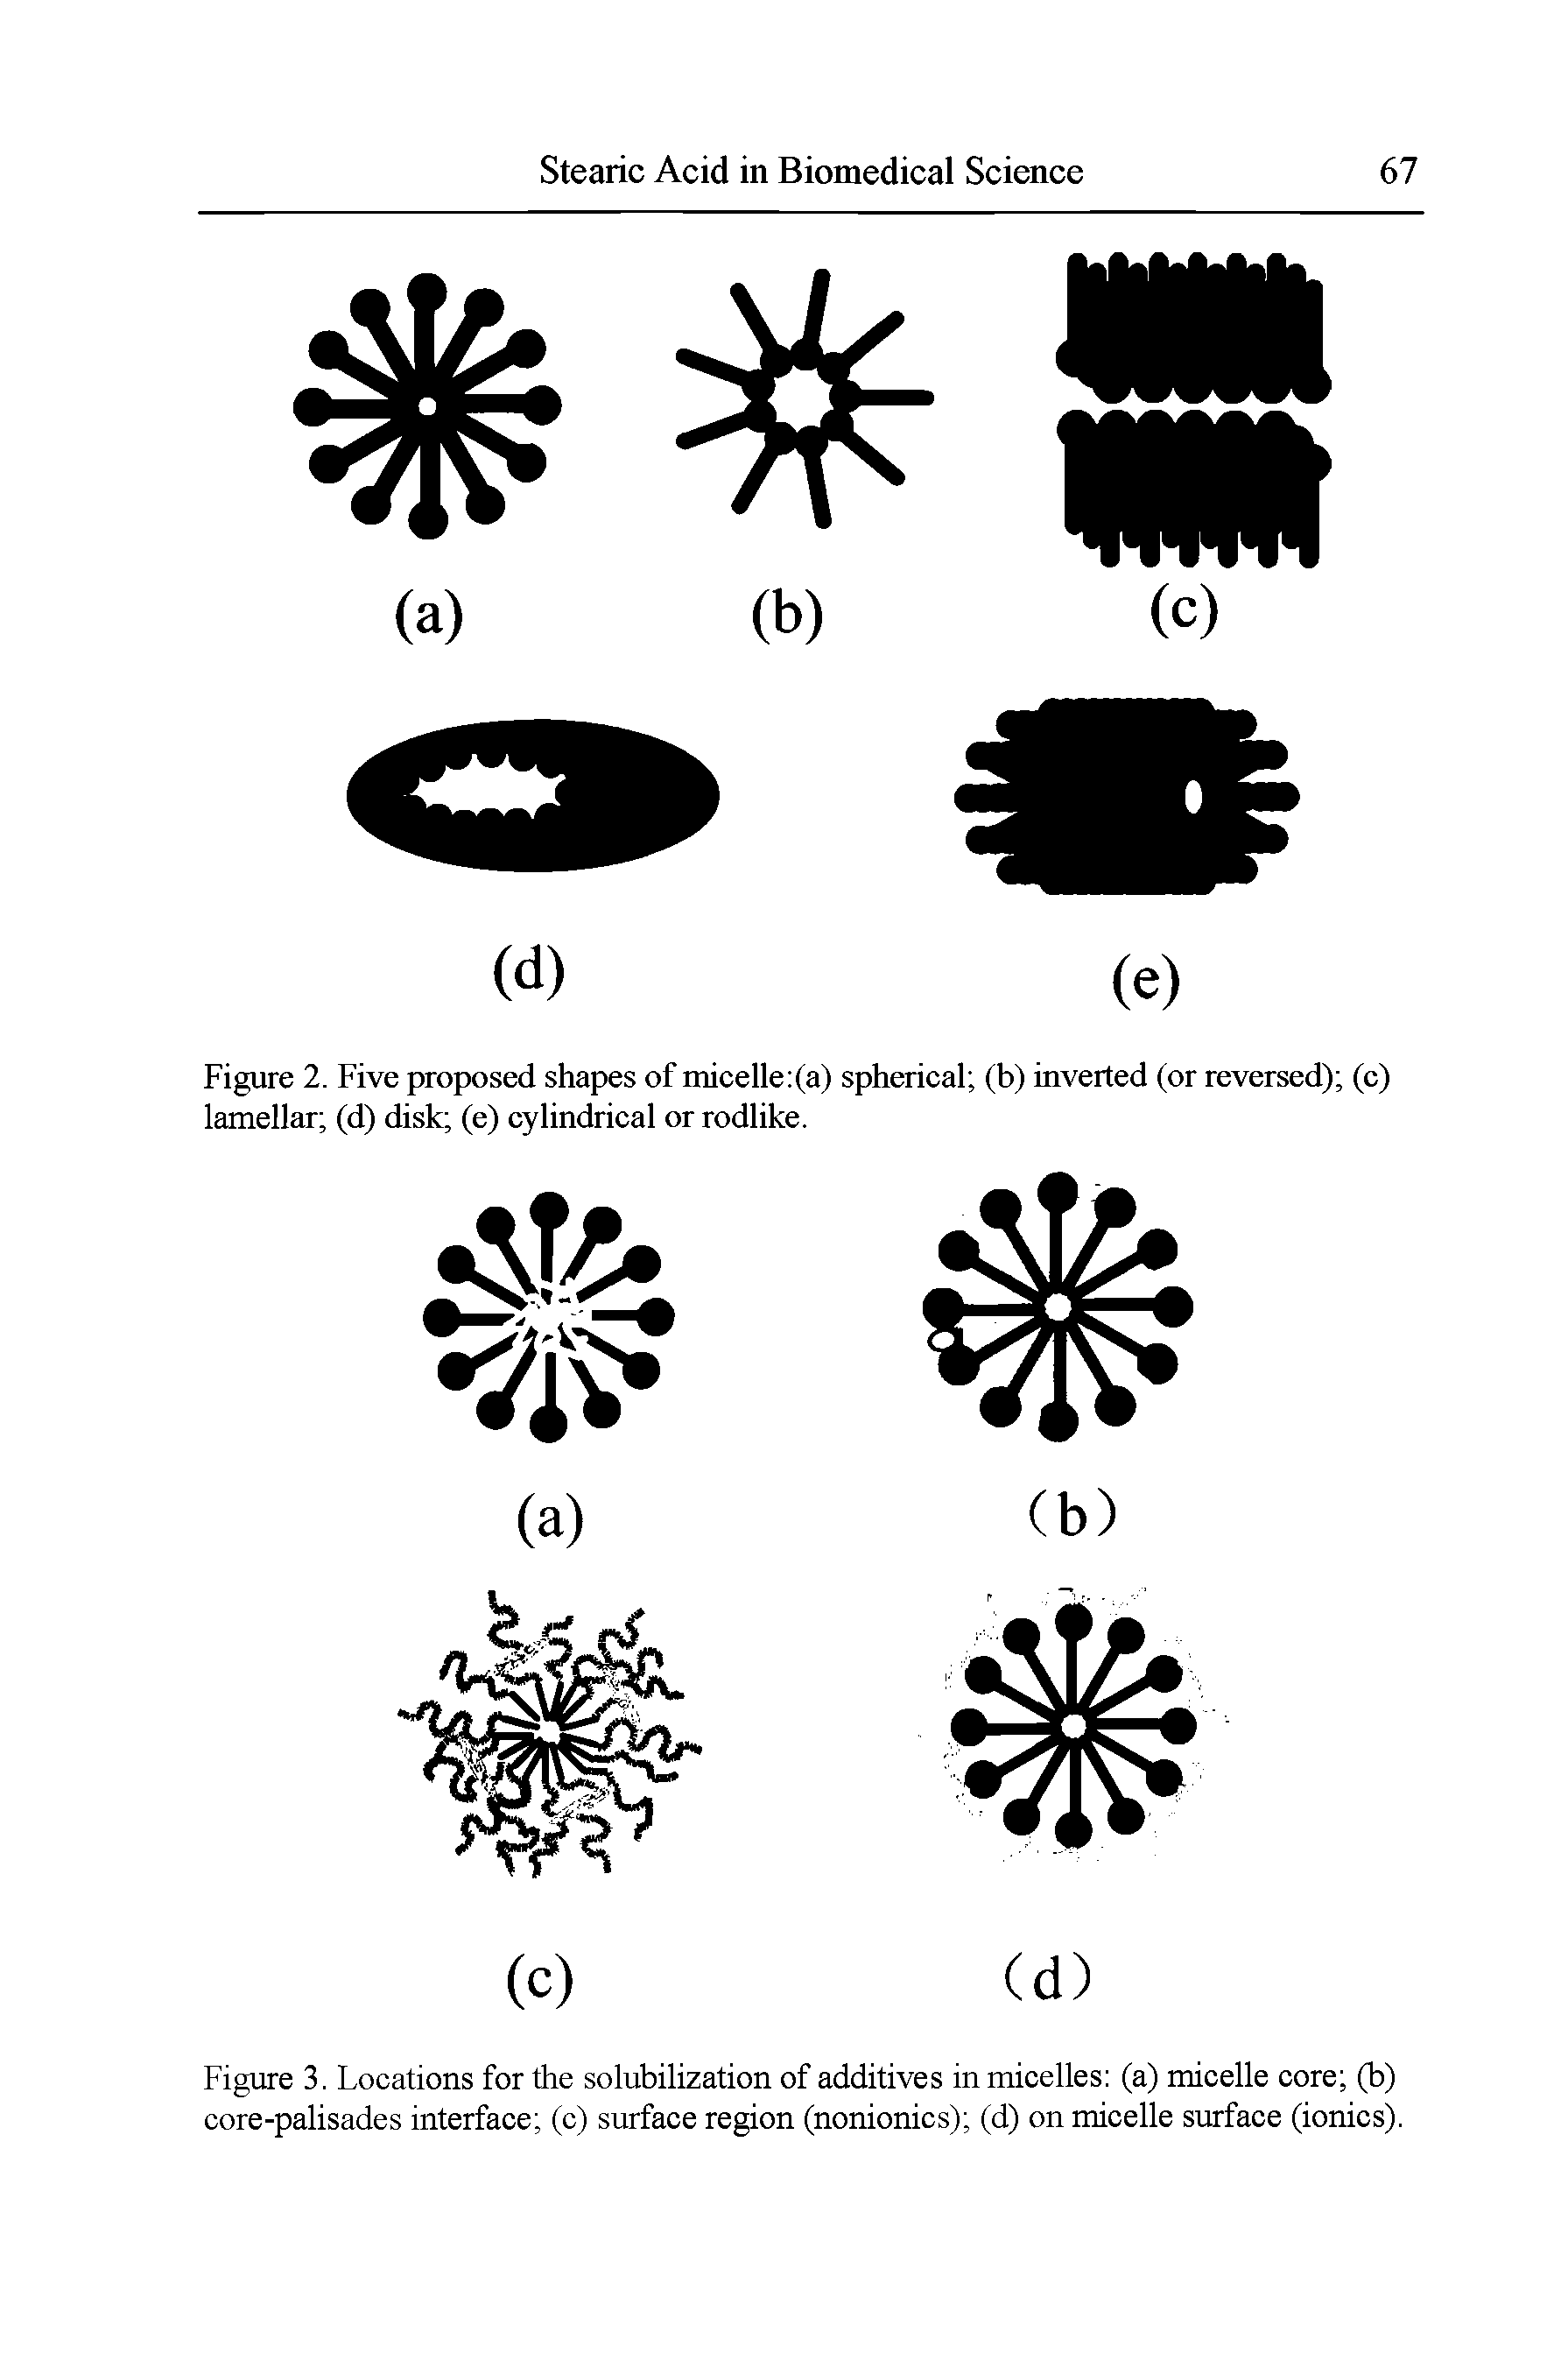 Figure 2. Five proposed shapes of micelle (a) spherieal (b) inverted (or reversed) (e) lamellar (d) disk (e) cylindrical or rodlike.